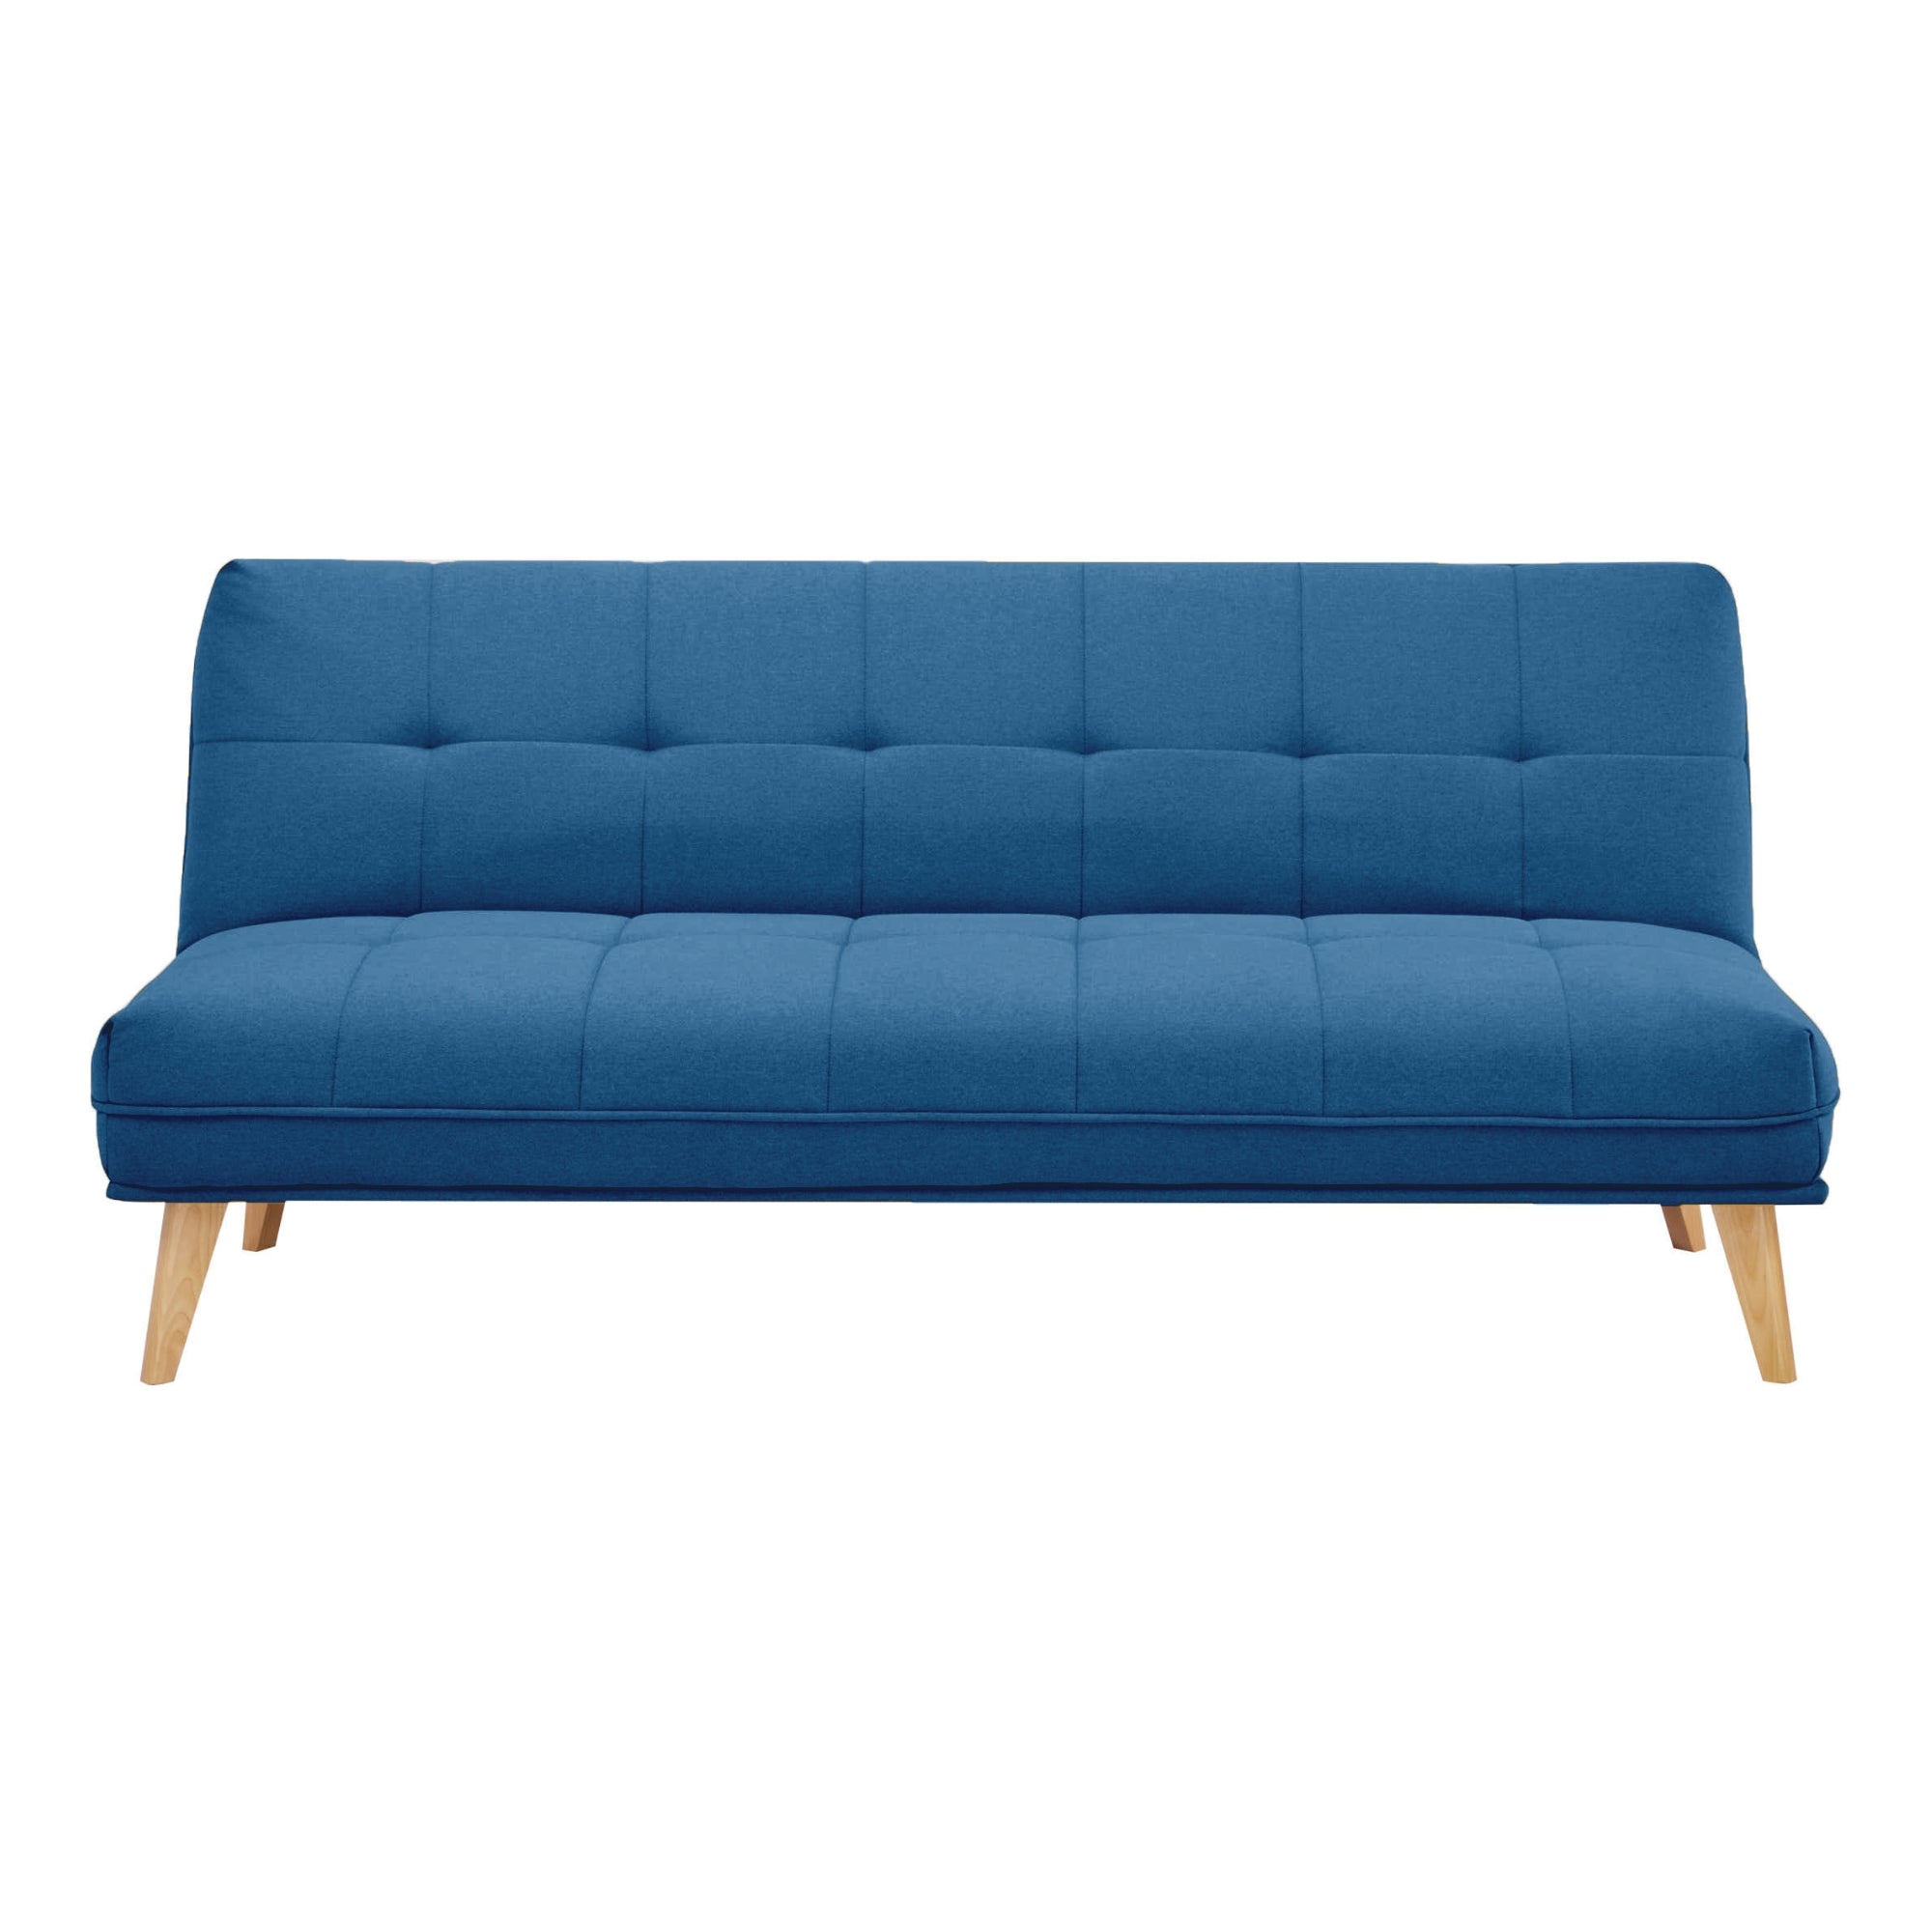 Blue 3-Seater Sofa Bed, Plush Upholstery, Durable Frame - Jovie